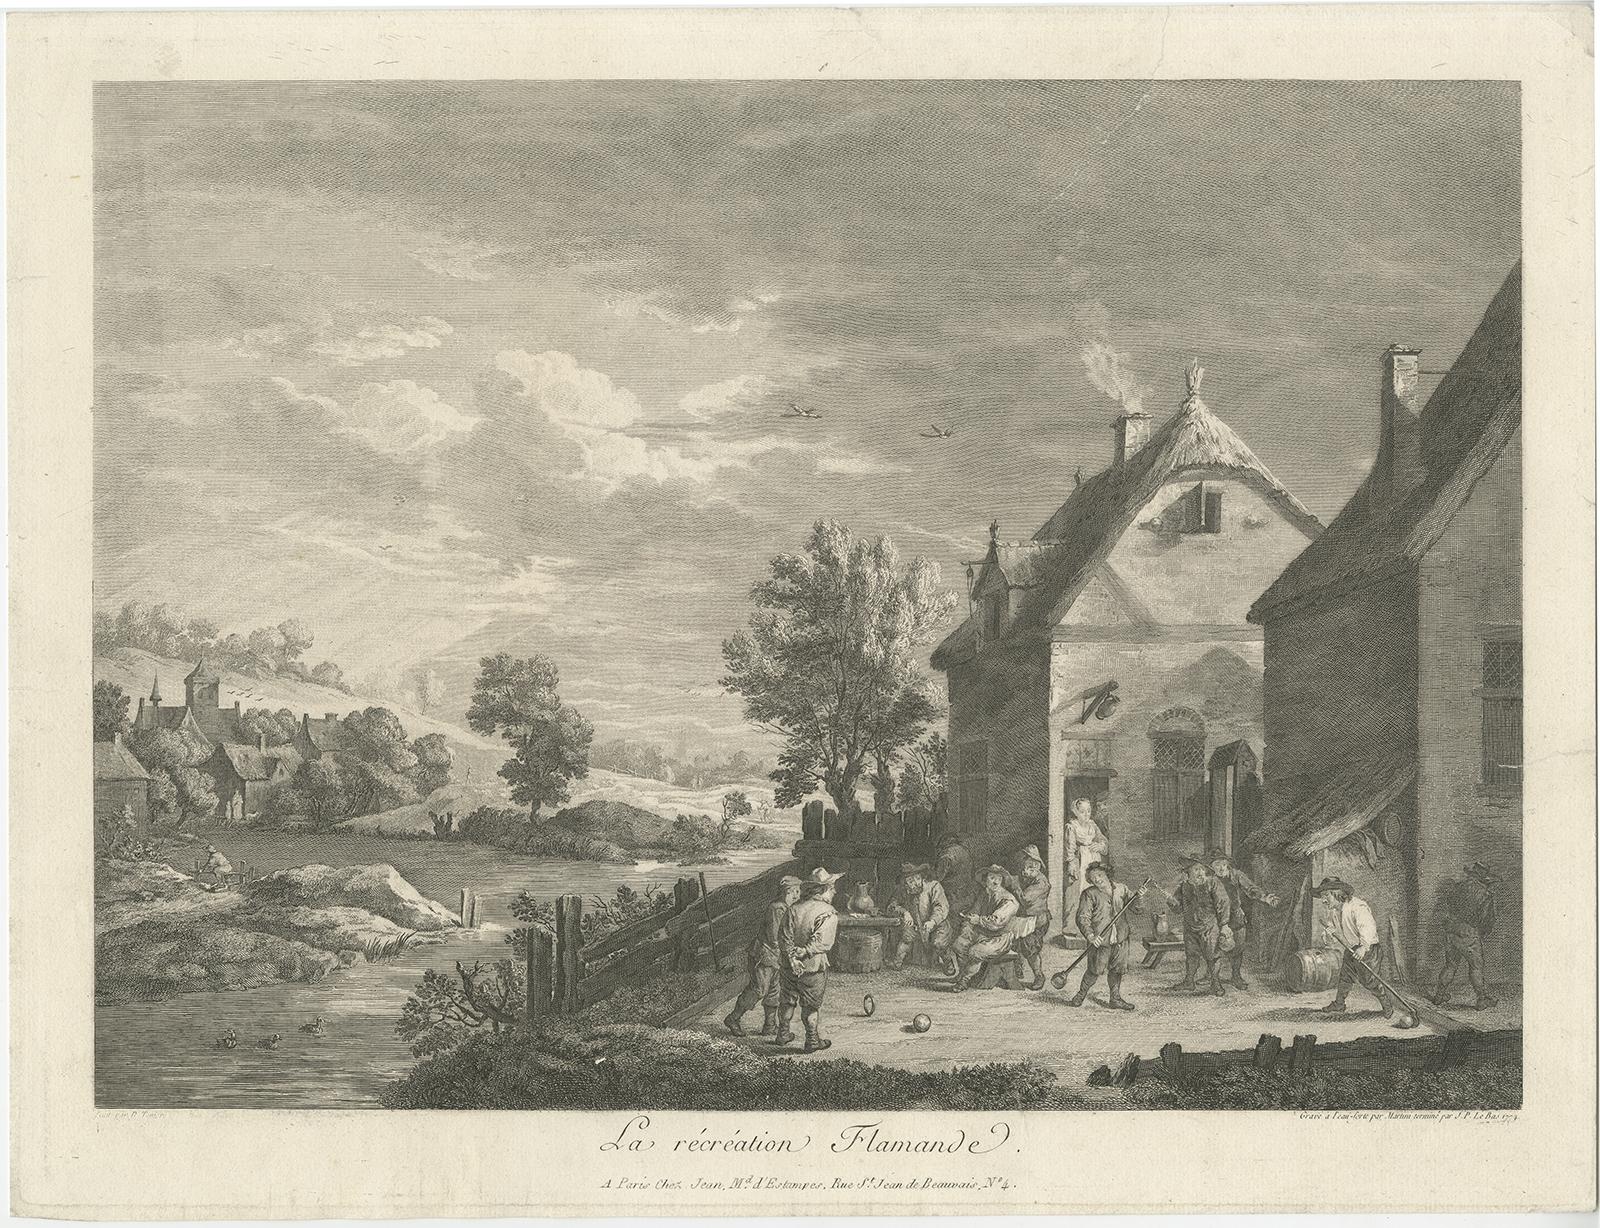 Antique print titled 'La récréation Flamande'. 

Original antique print of people playing games in Flanders, Belgium. Published 1774.

Artists and Engravers: Engraved by Martini after Teniers.

Condition: Fair/good, general age-related toning.